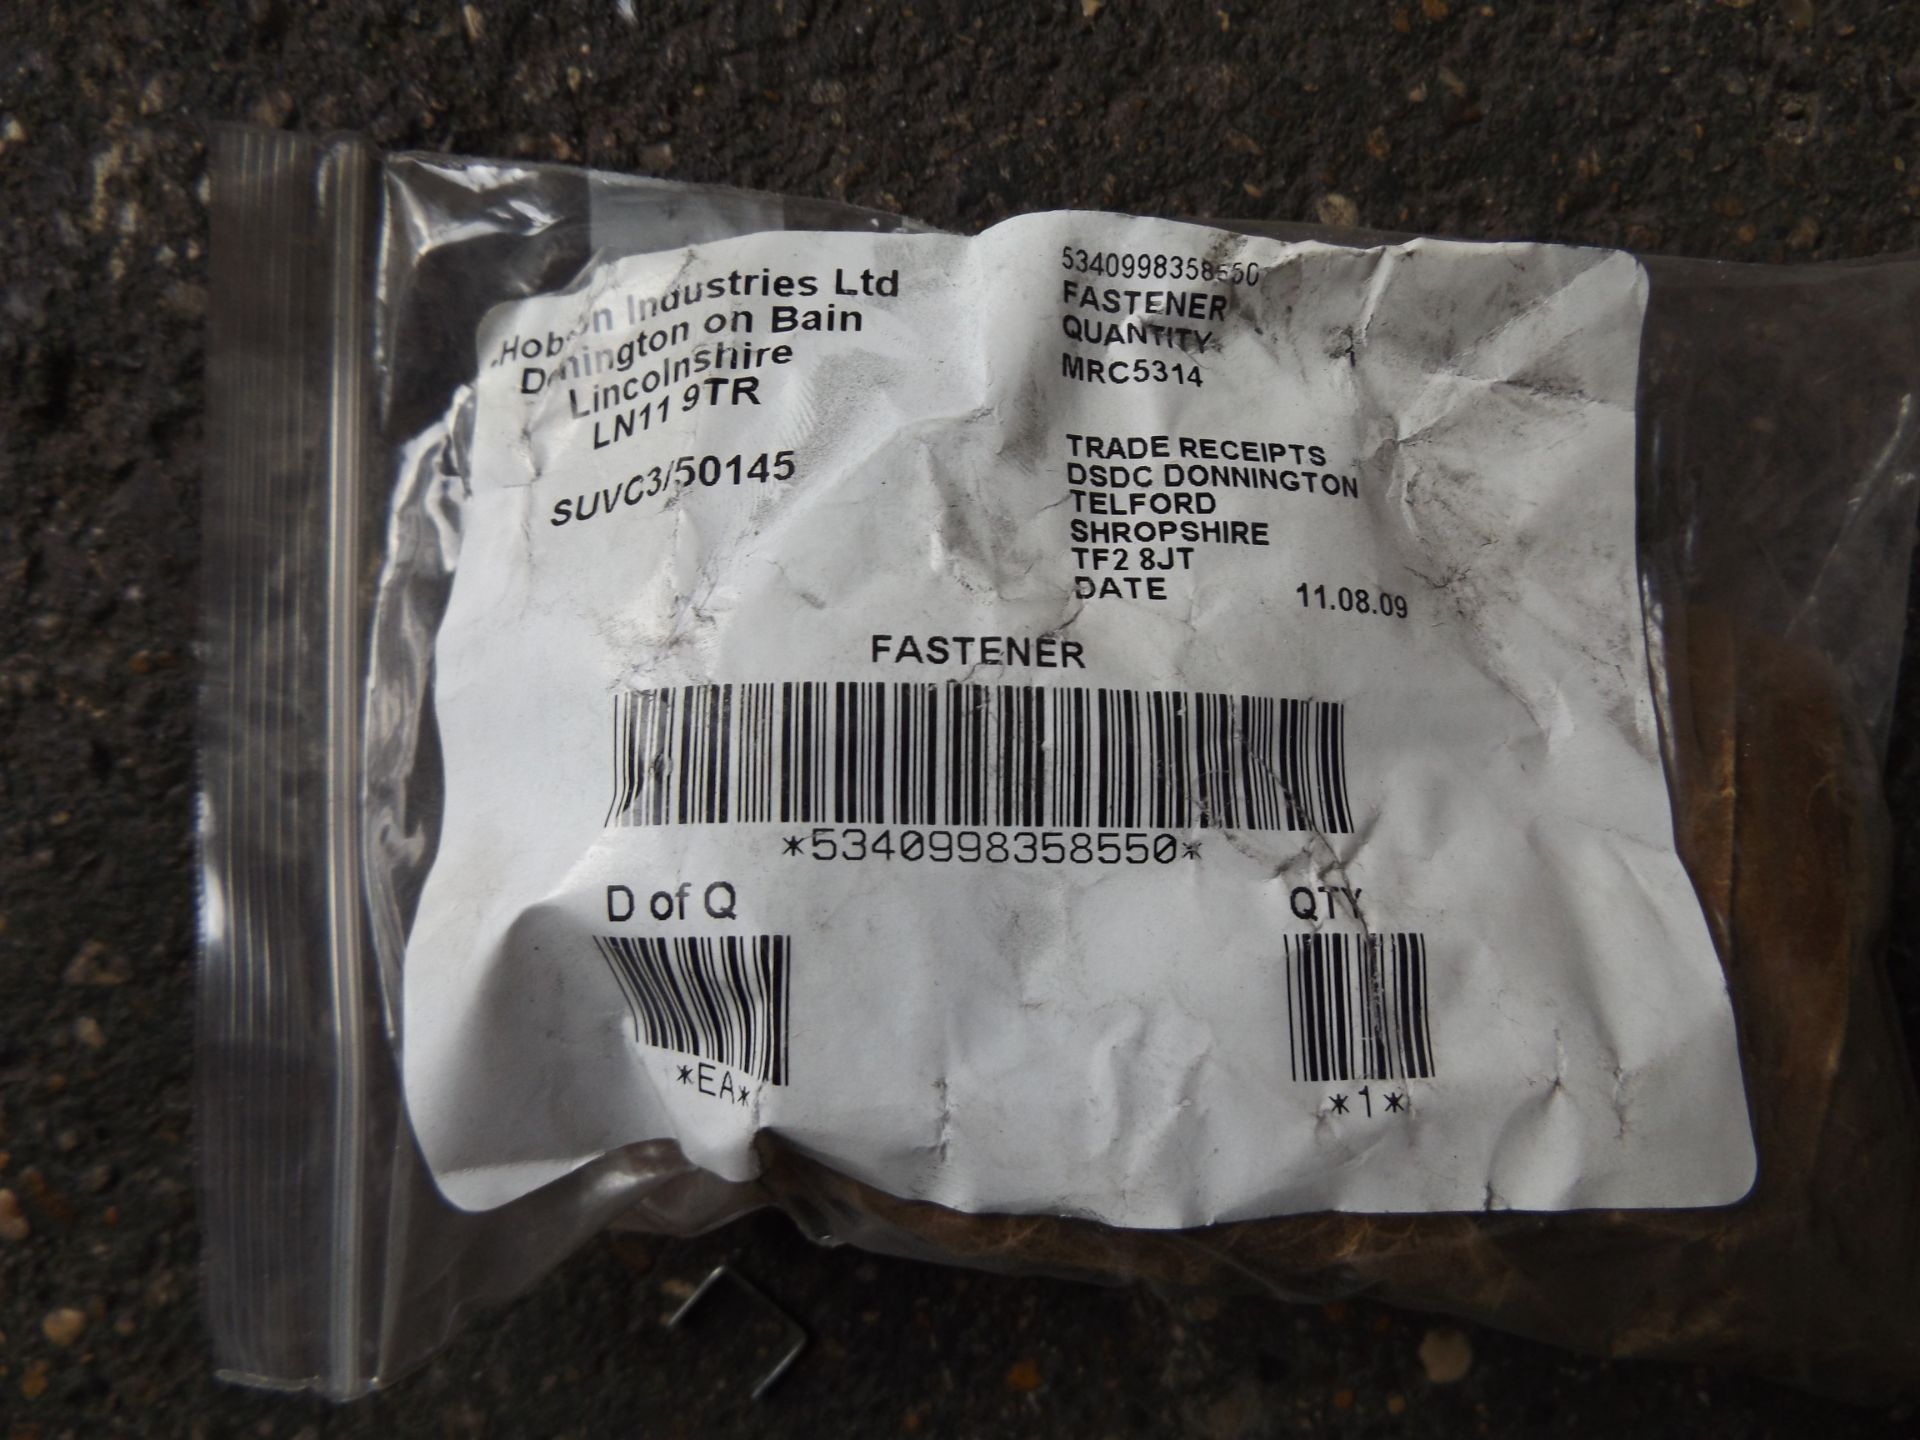 Approx 20 x Land Rover Bonnet Fasteners P/No MRC5314 - Image 4 of 4